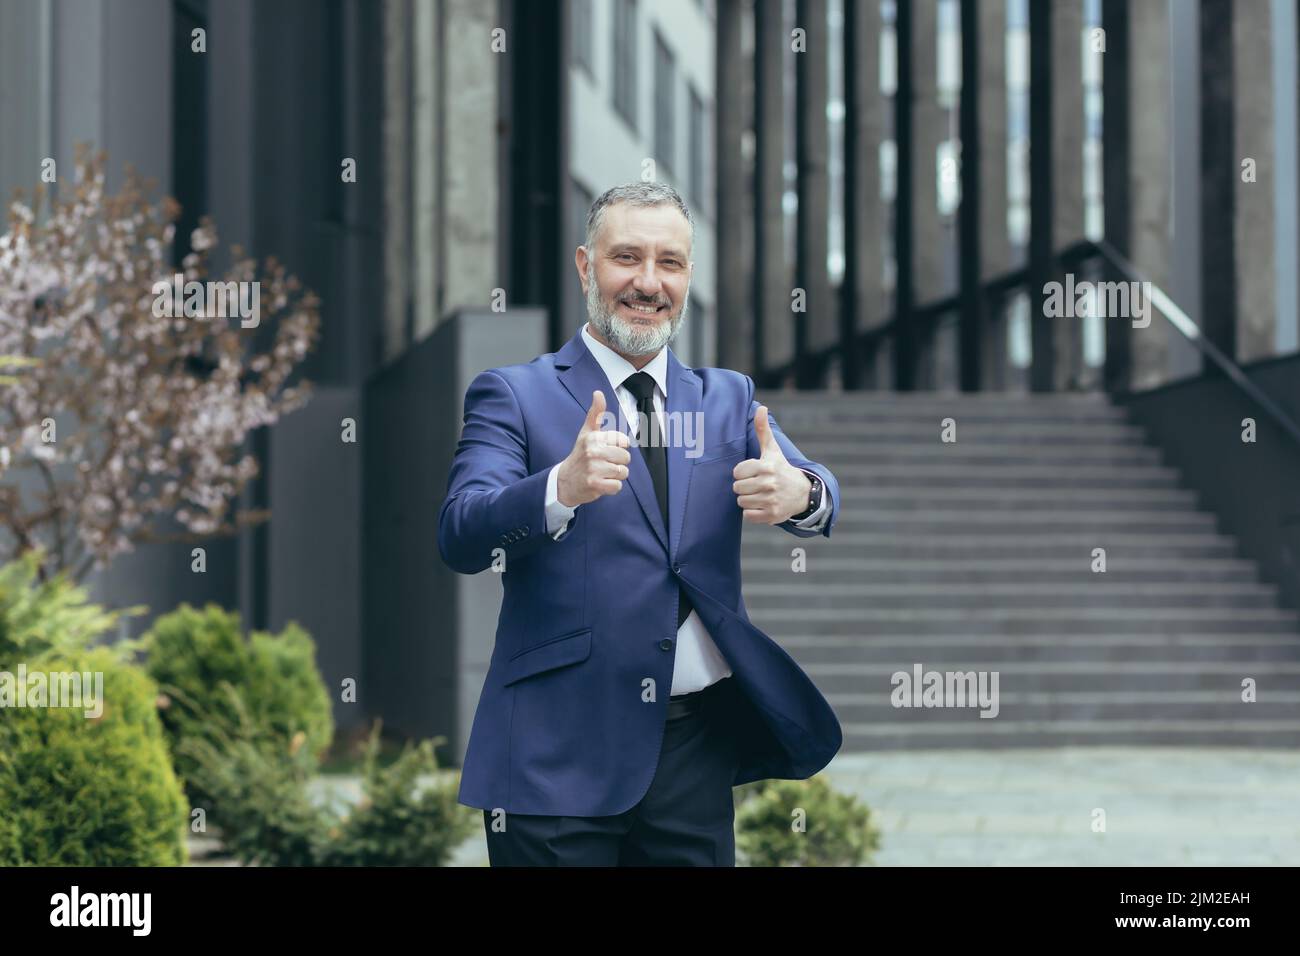 Successful senior gray haired businessman boss, outside office building smiling and looking at camera, experienced investor showing middle finger up, man in business suit Stock Photo